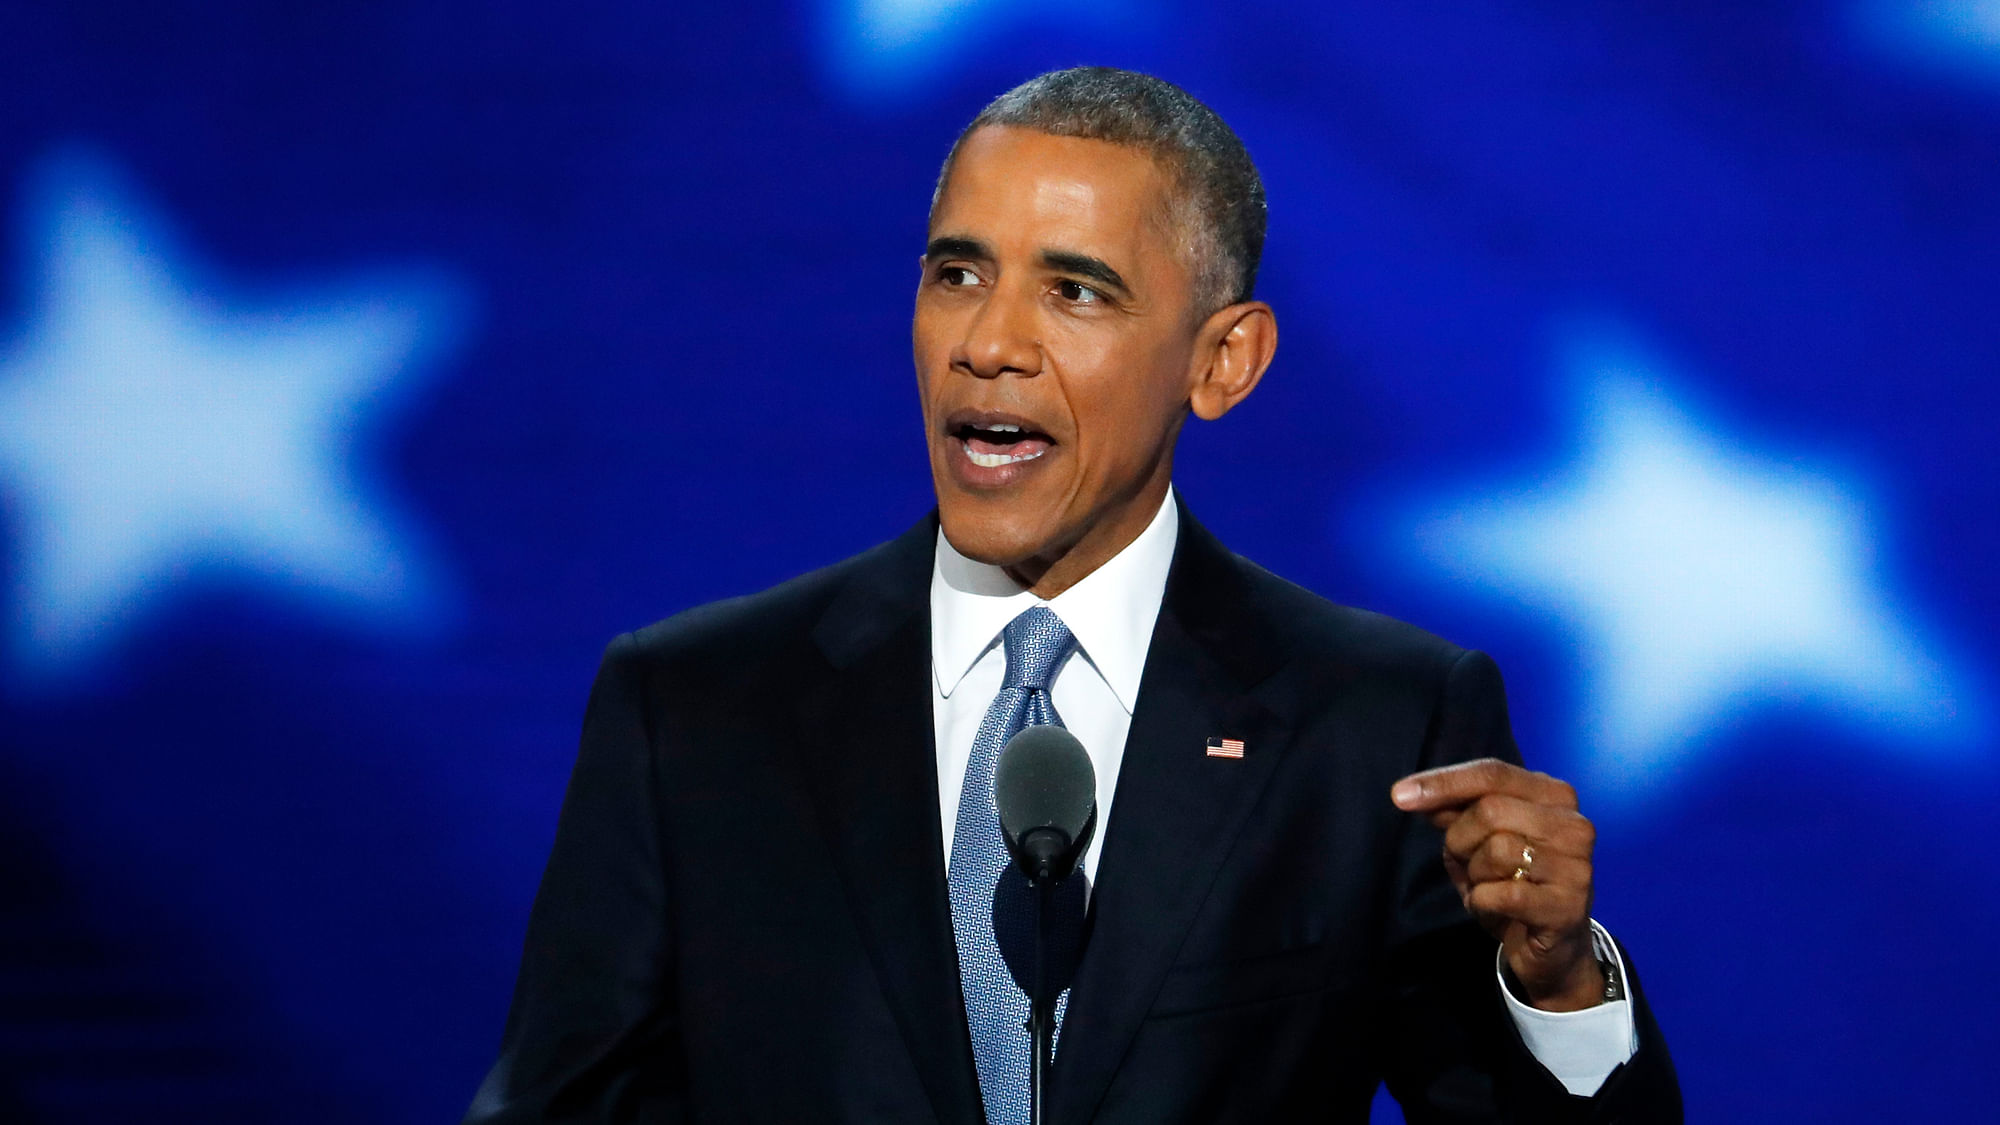 

US President Barack Obama took the stage at the Democratic National Convention on Wednesday amid thunderous applause. (Photo: AP)